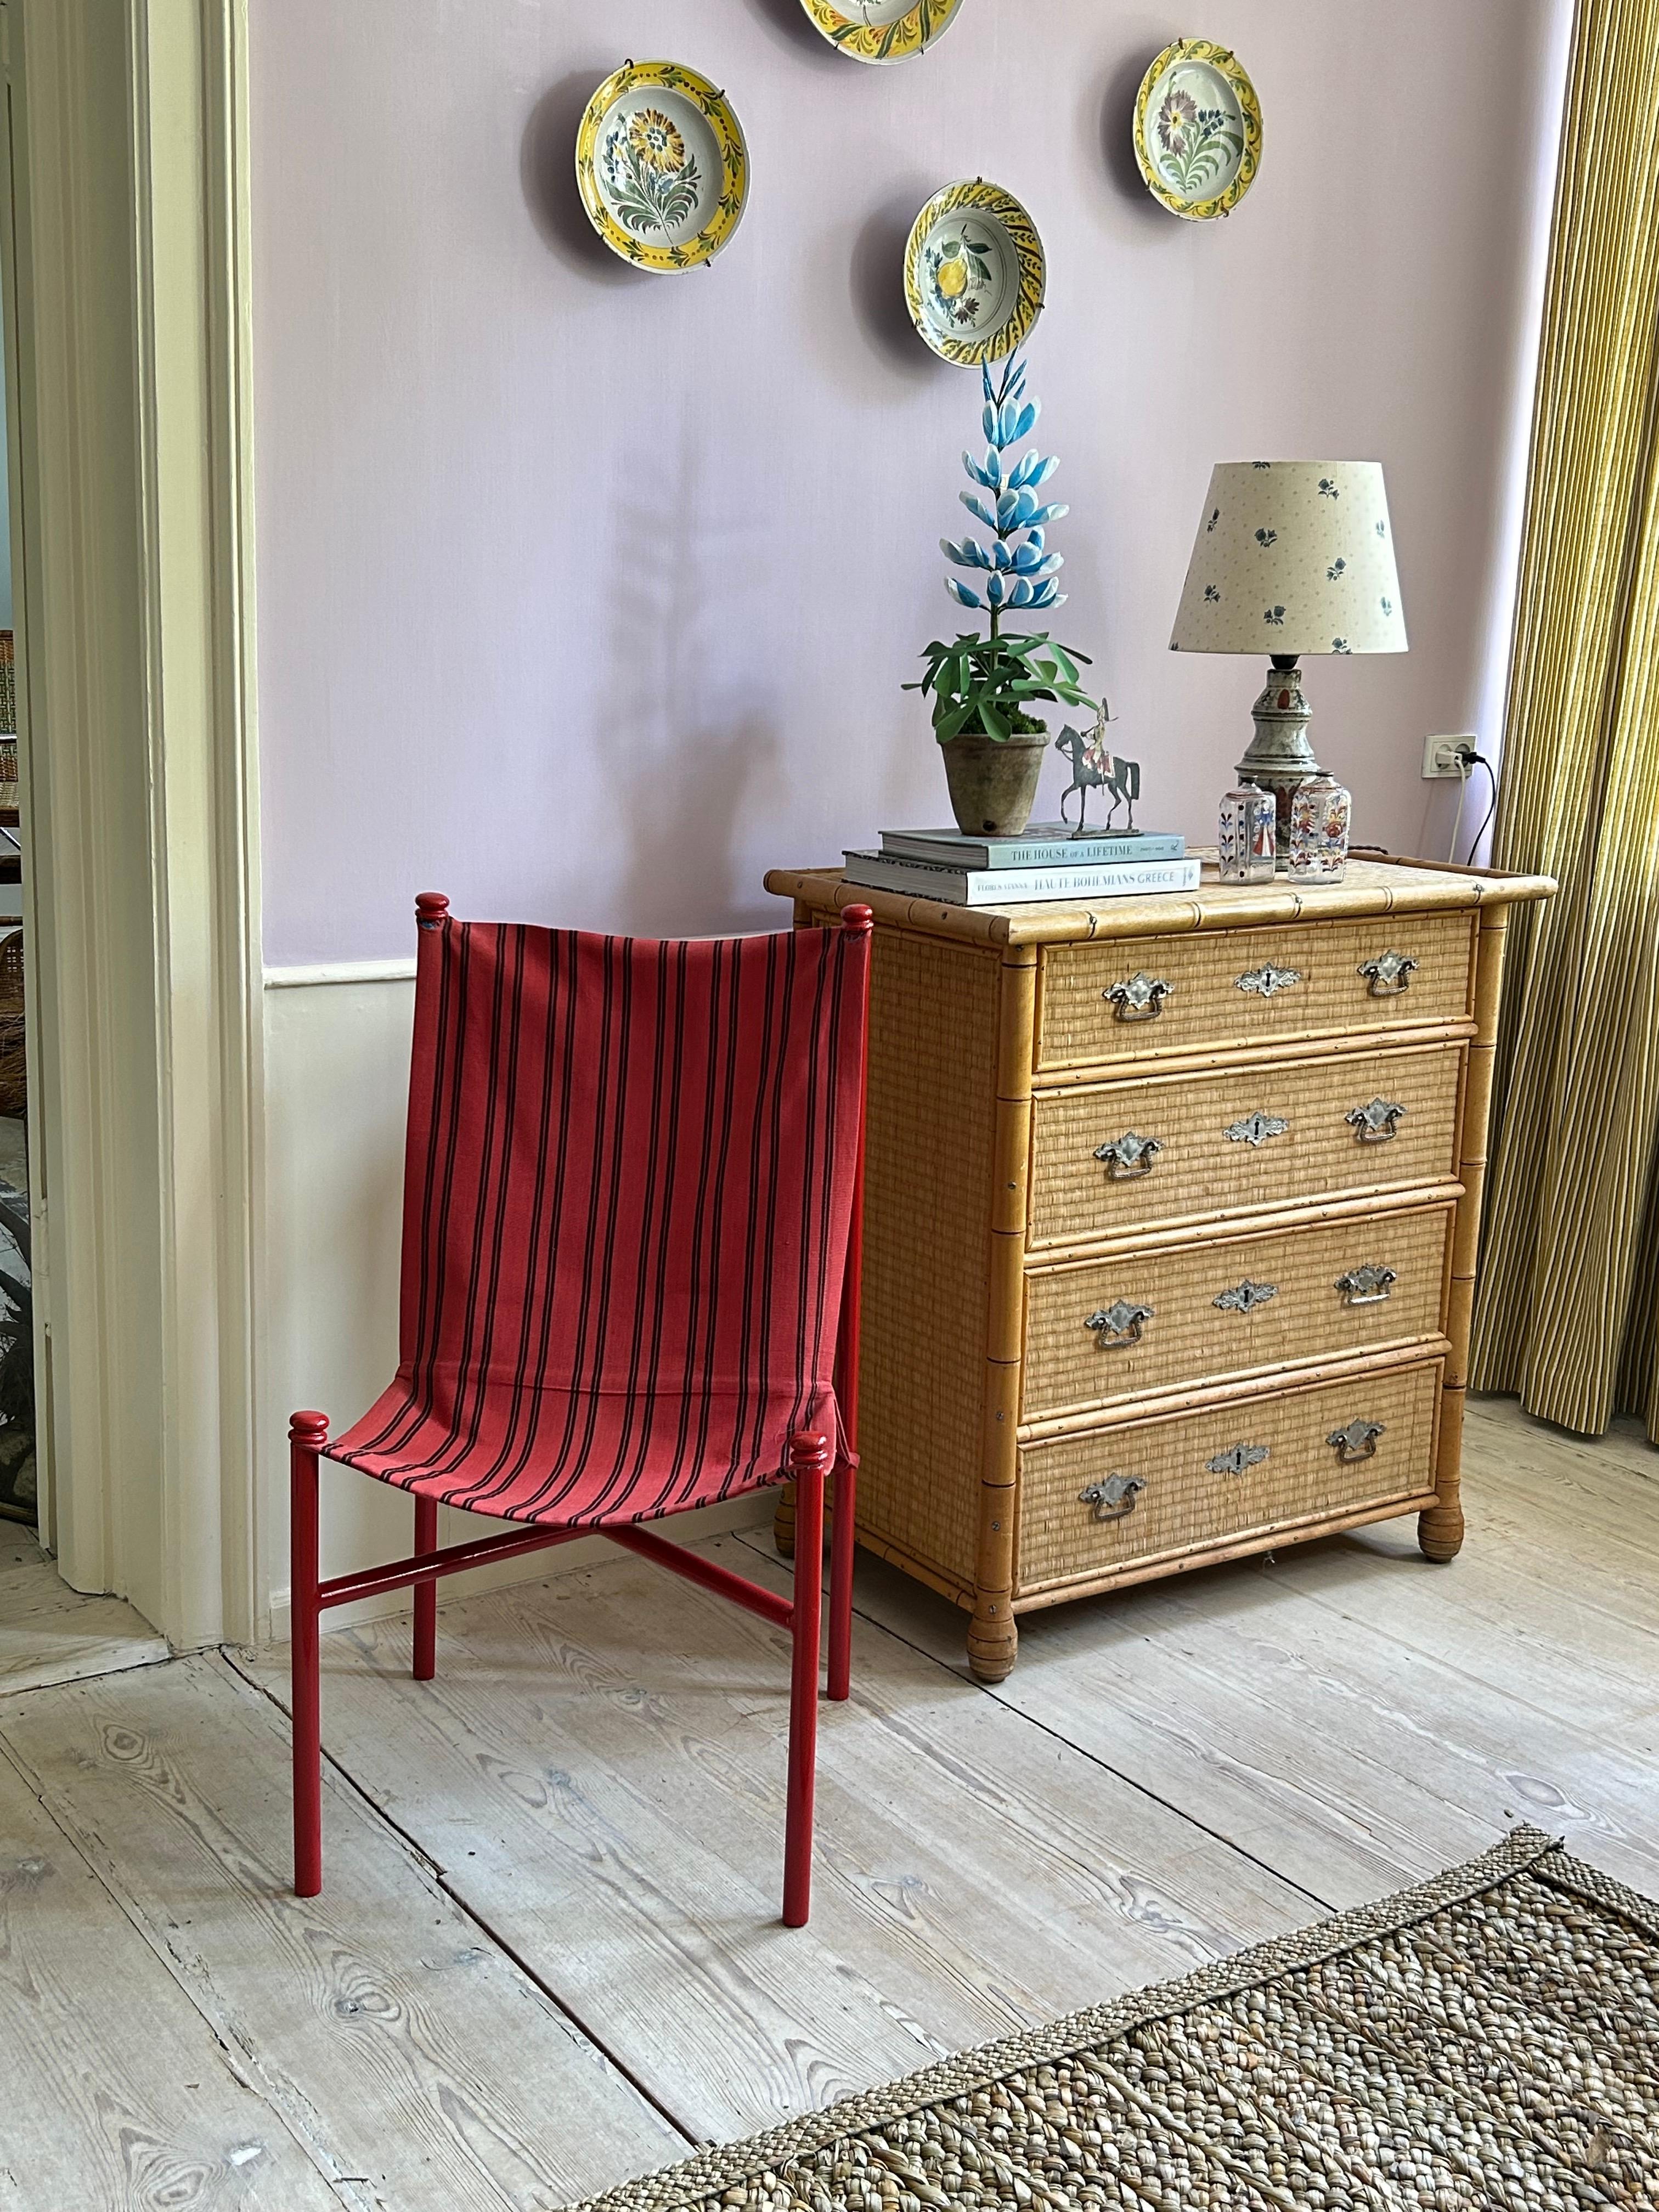 French Vintage Felix Aublet Chair in Red Tubular Steel and Striped Fabric, France, 1935 For Sale